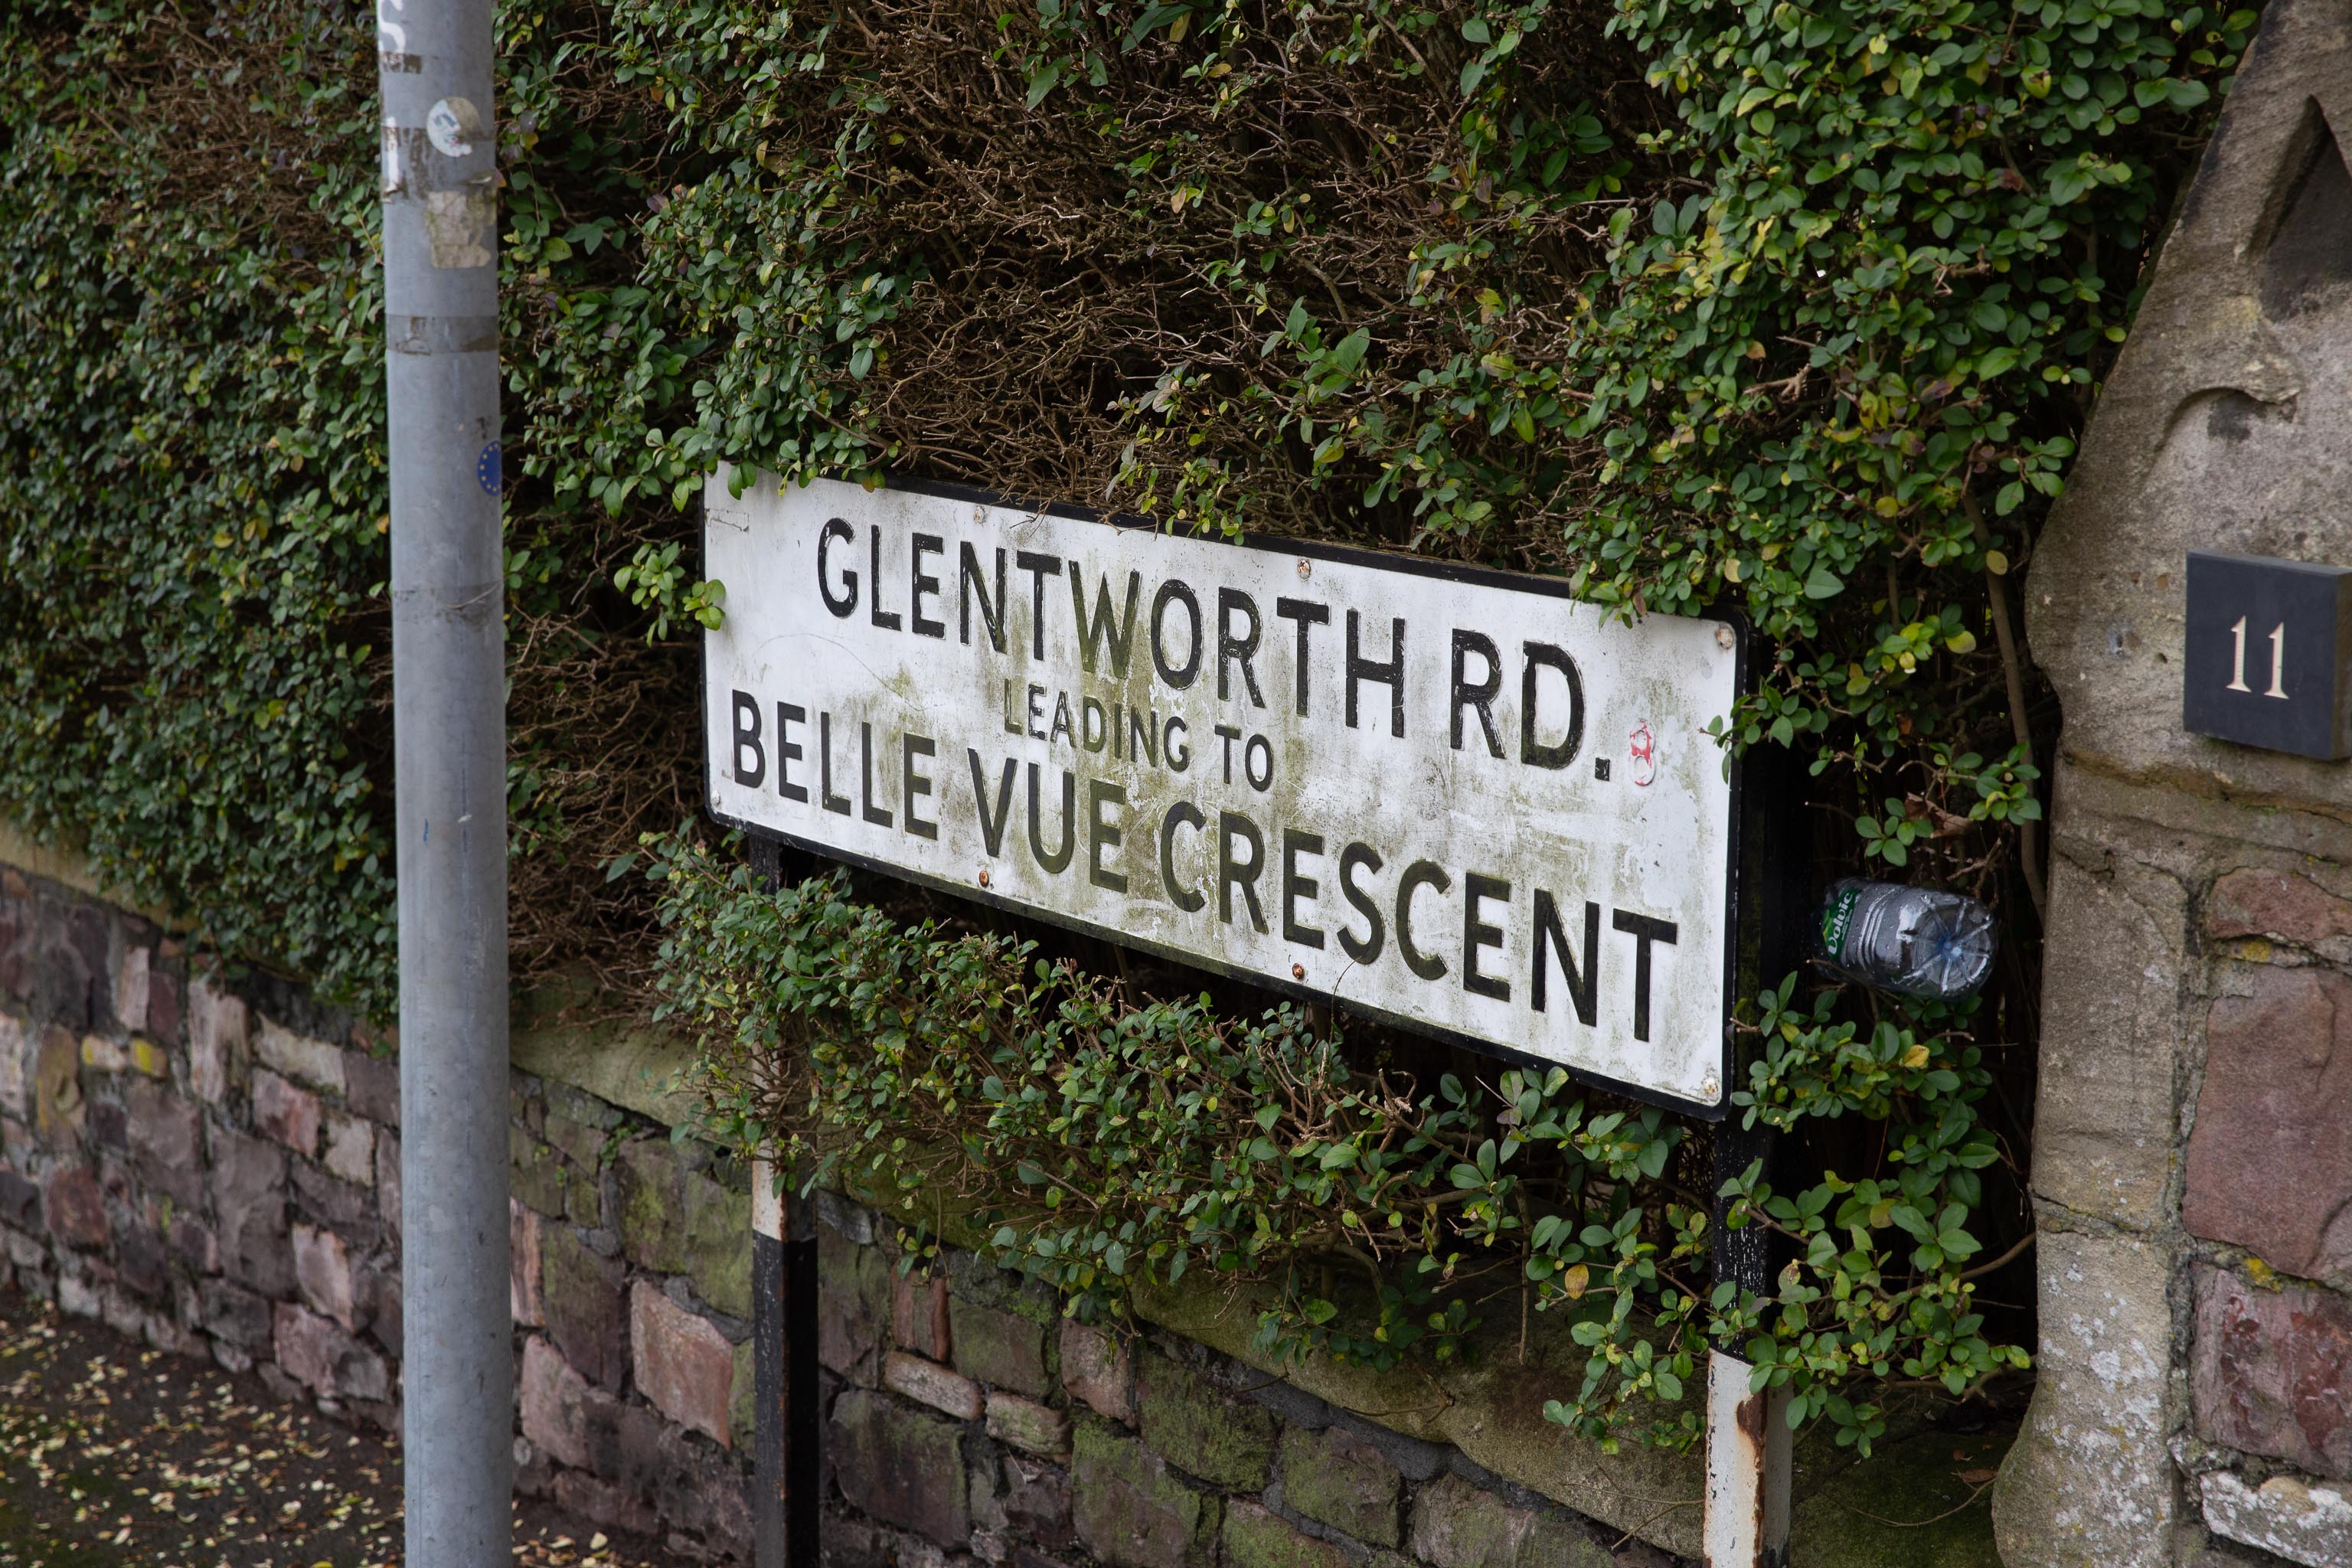 Belle Vue
Generally "Belle Vue" transitions gradually into "Bellevue" over time, it seems, but some holdouts remain
